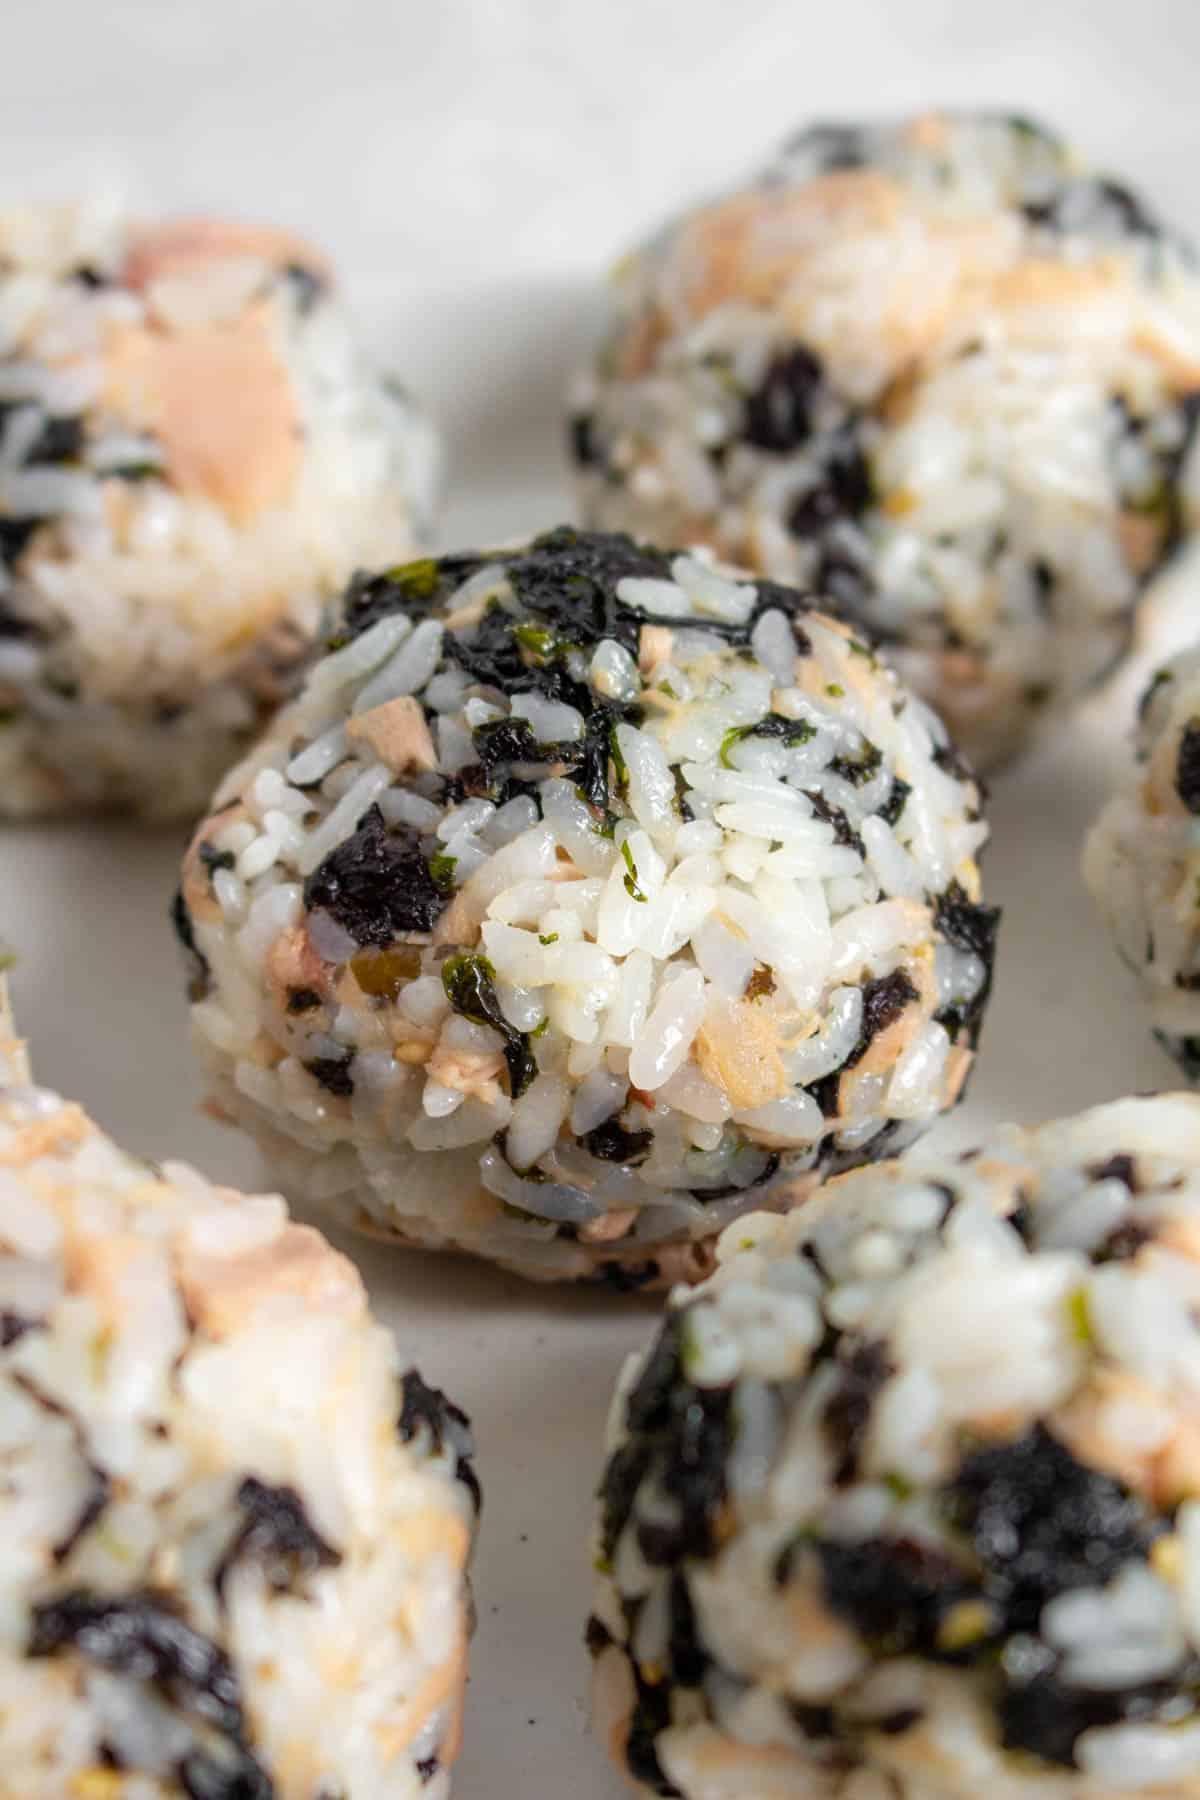 One tuna mayo rice ball in focus surrounded by more balls.